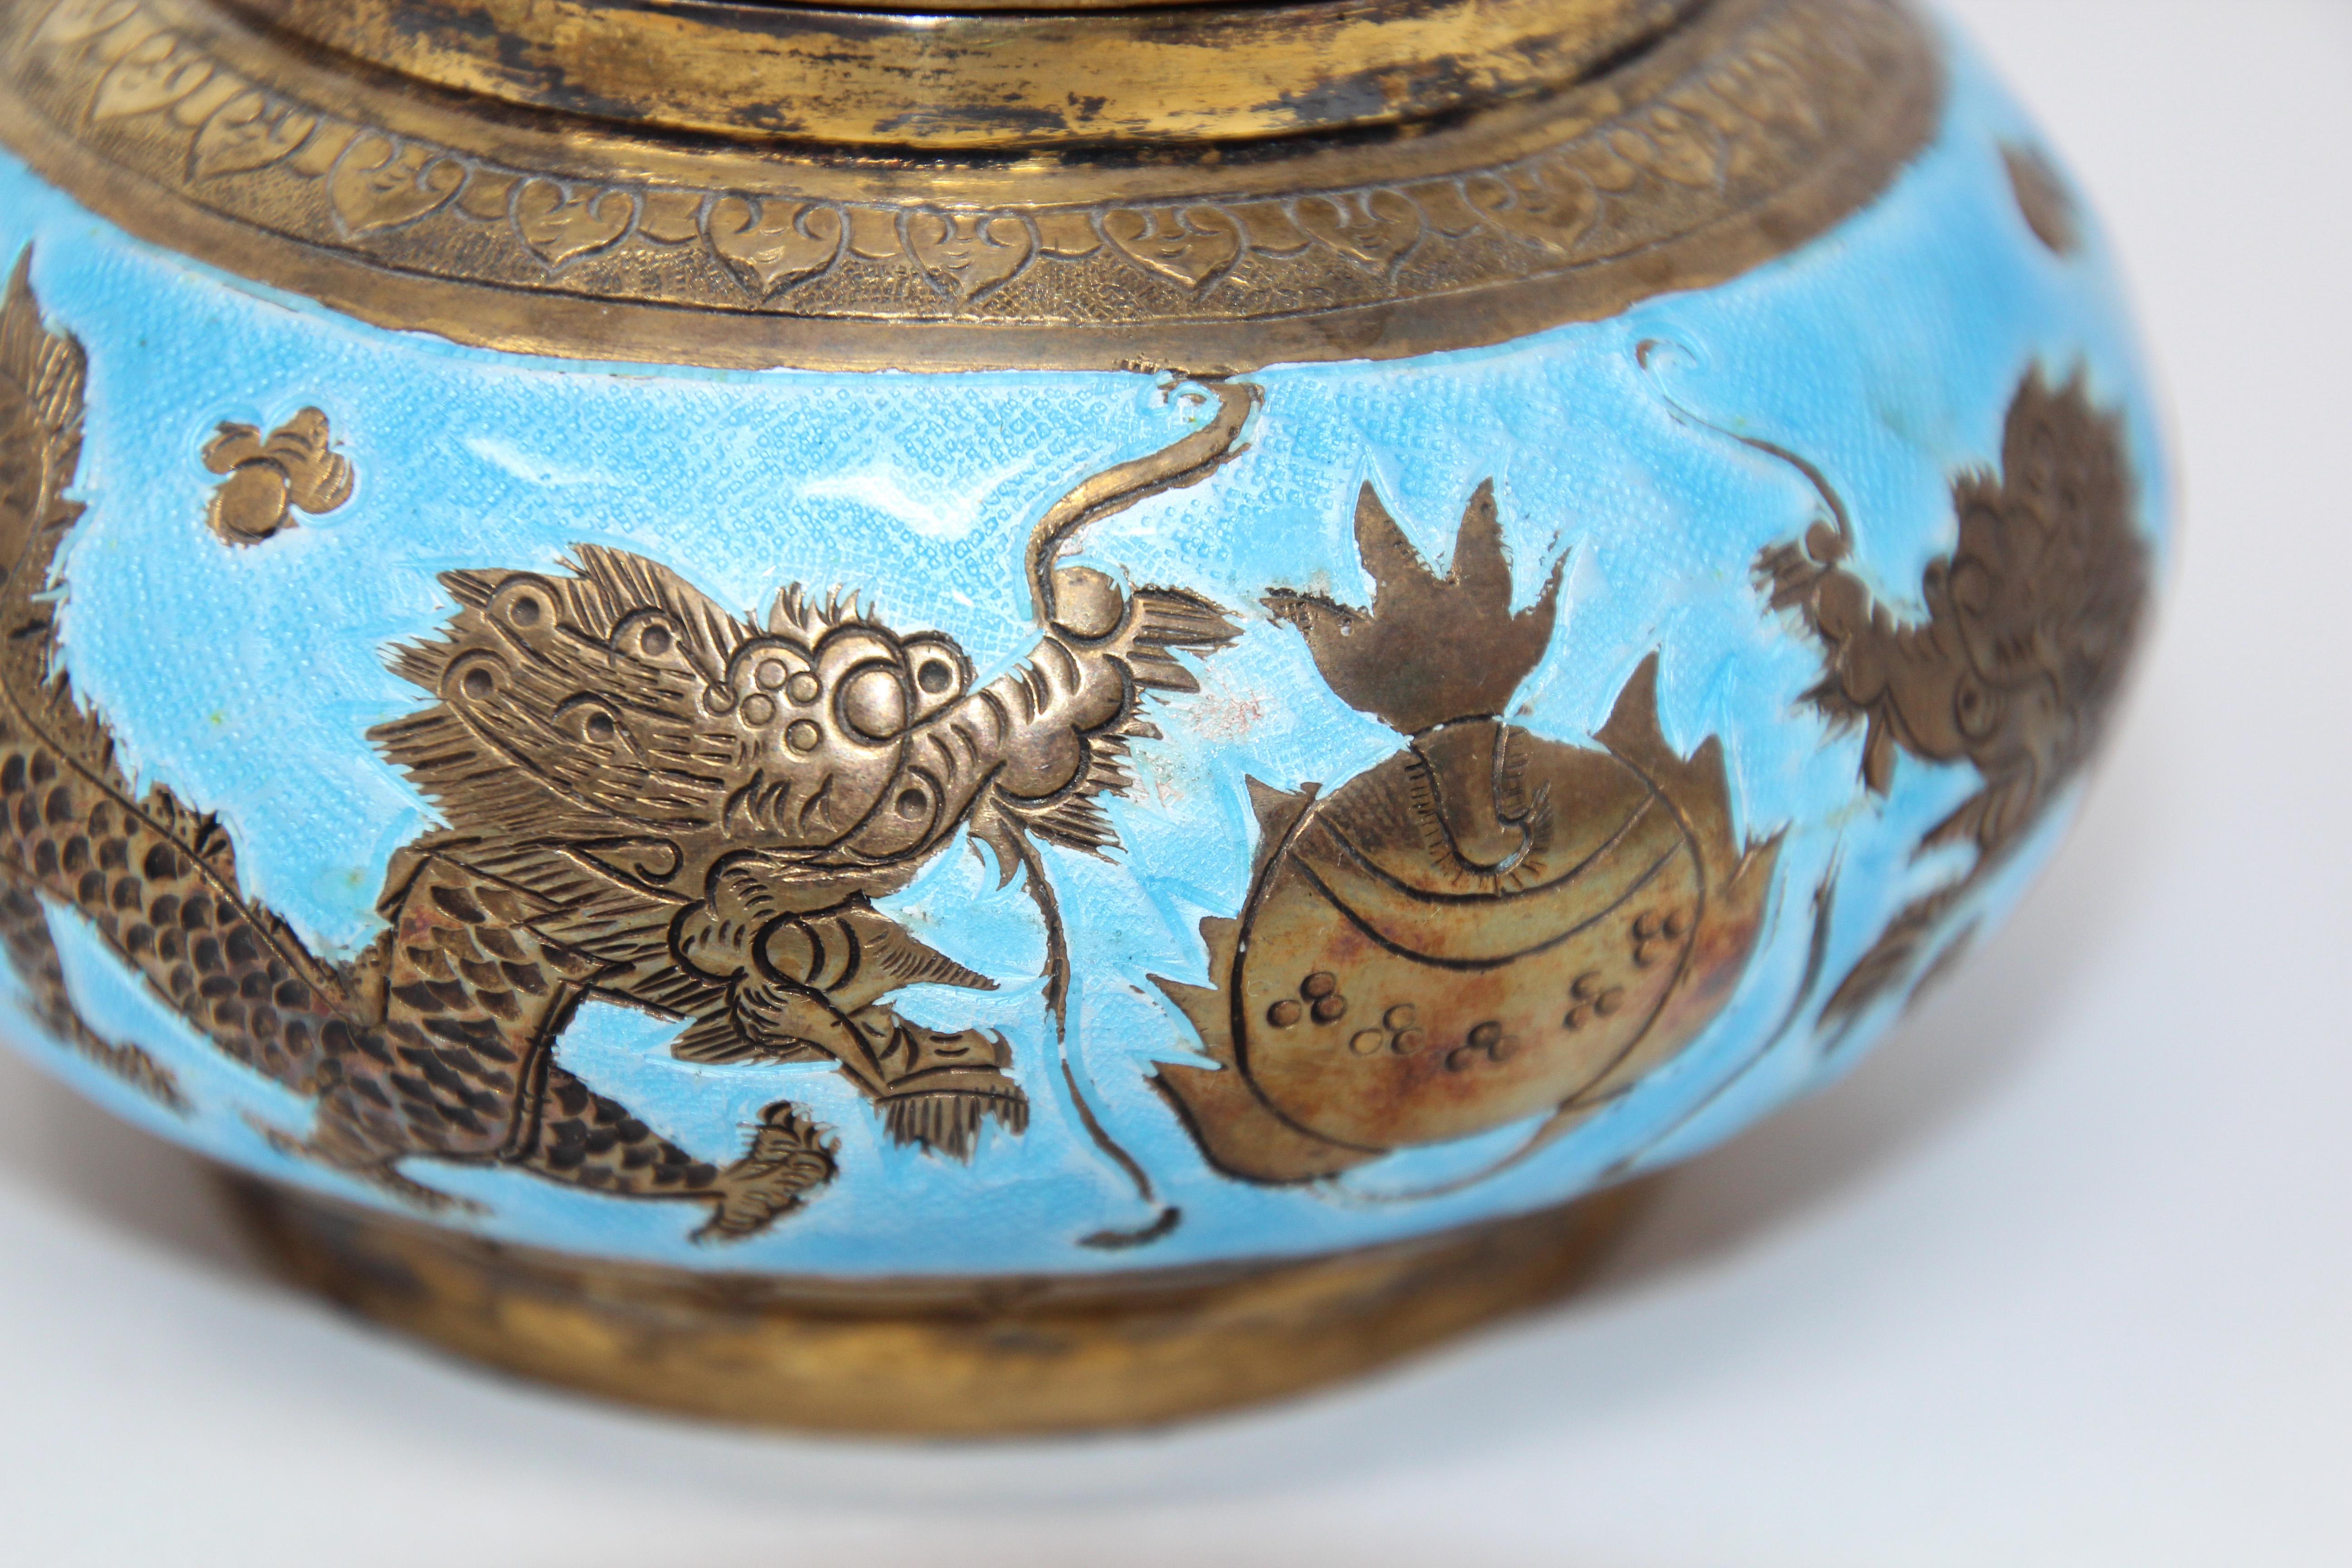 Metal Chinese Export Brass Snuff Box with Turquoise Enamel Dragons and Beads Inlaid